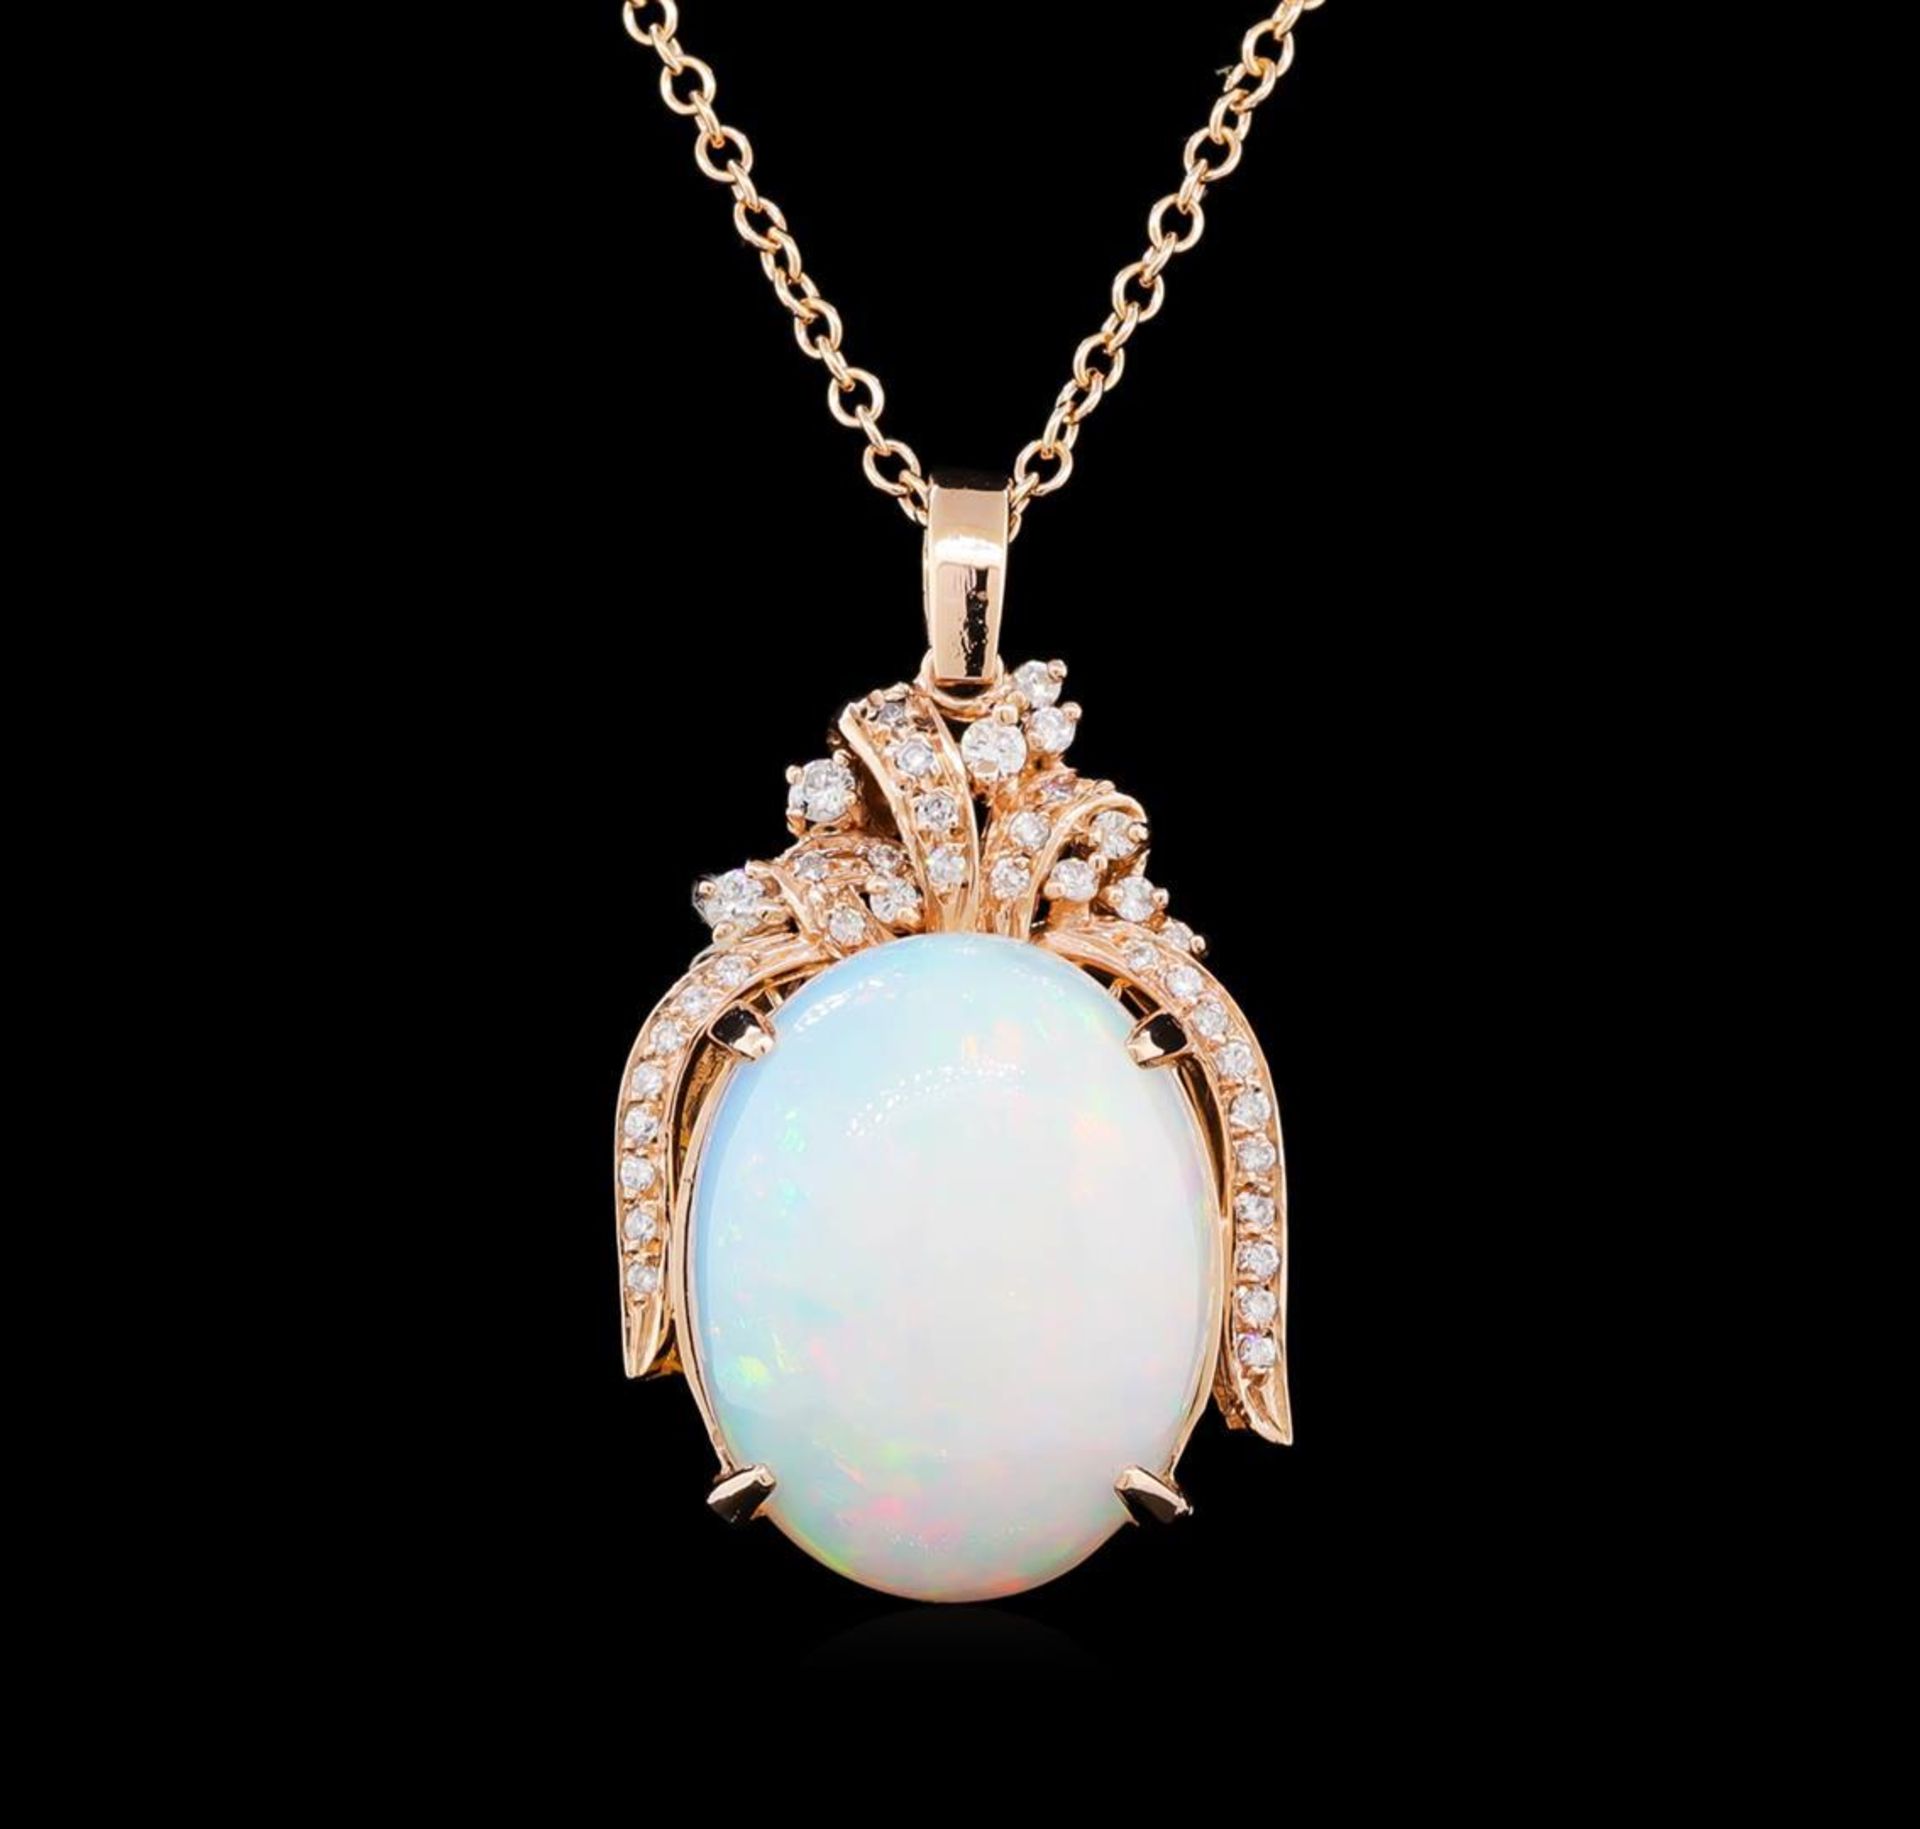 23.65 ctw Opal and Diamond Pendant With Chain - 14KT Rose Gold - Image 2 of 4